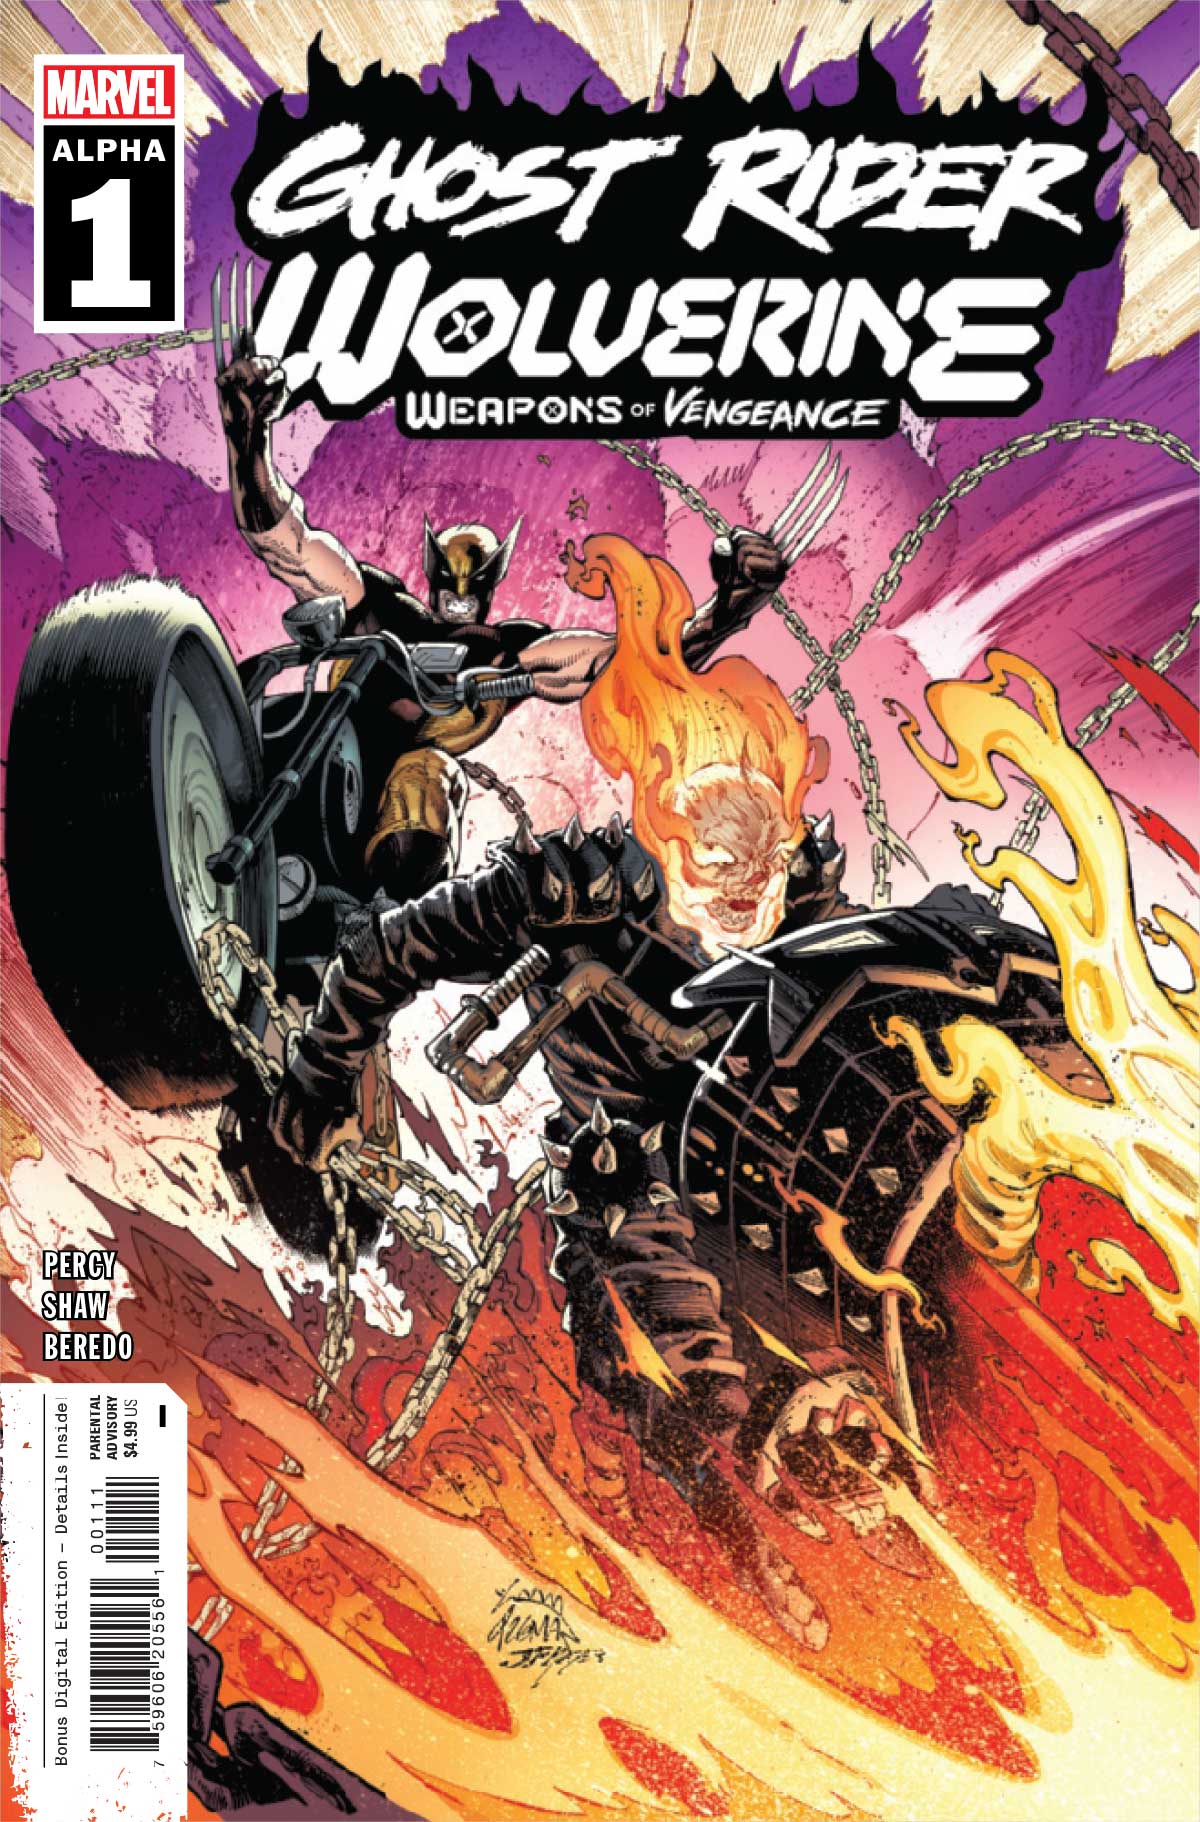 Sneak Preview: Marvel has a new Ghost Rider and he